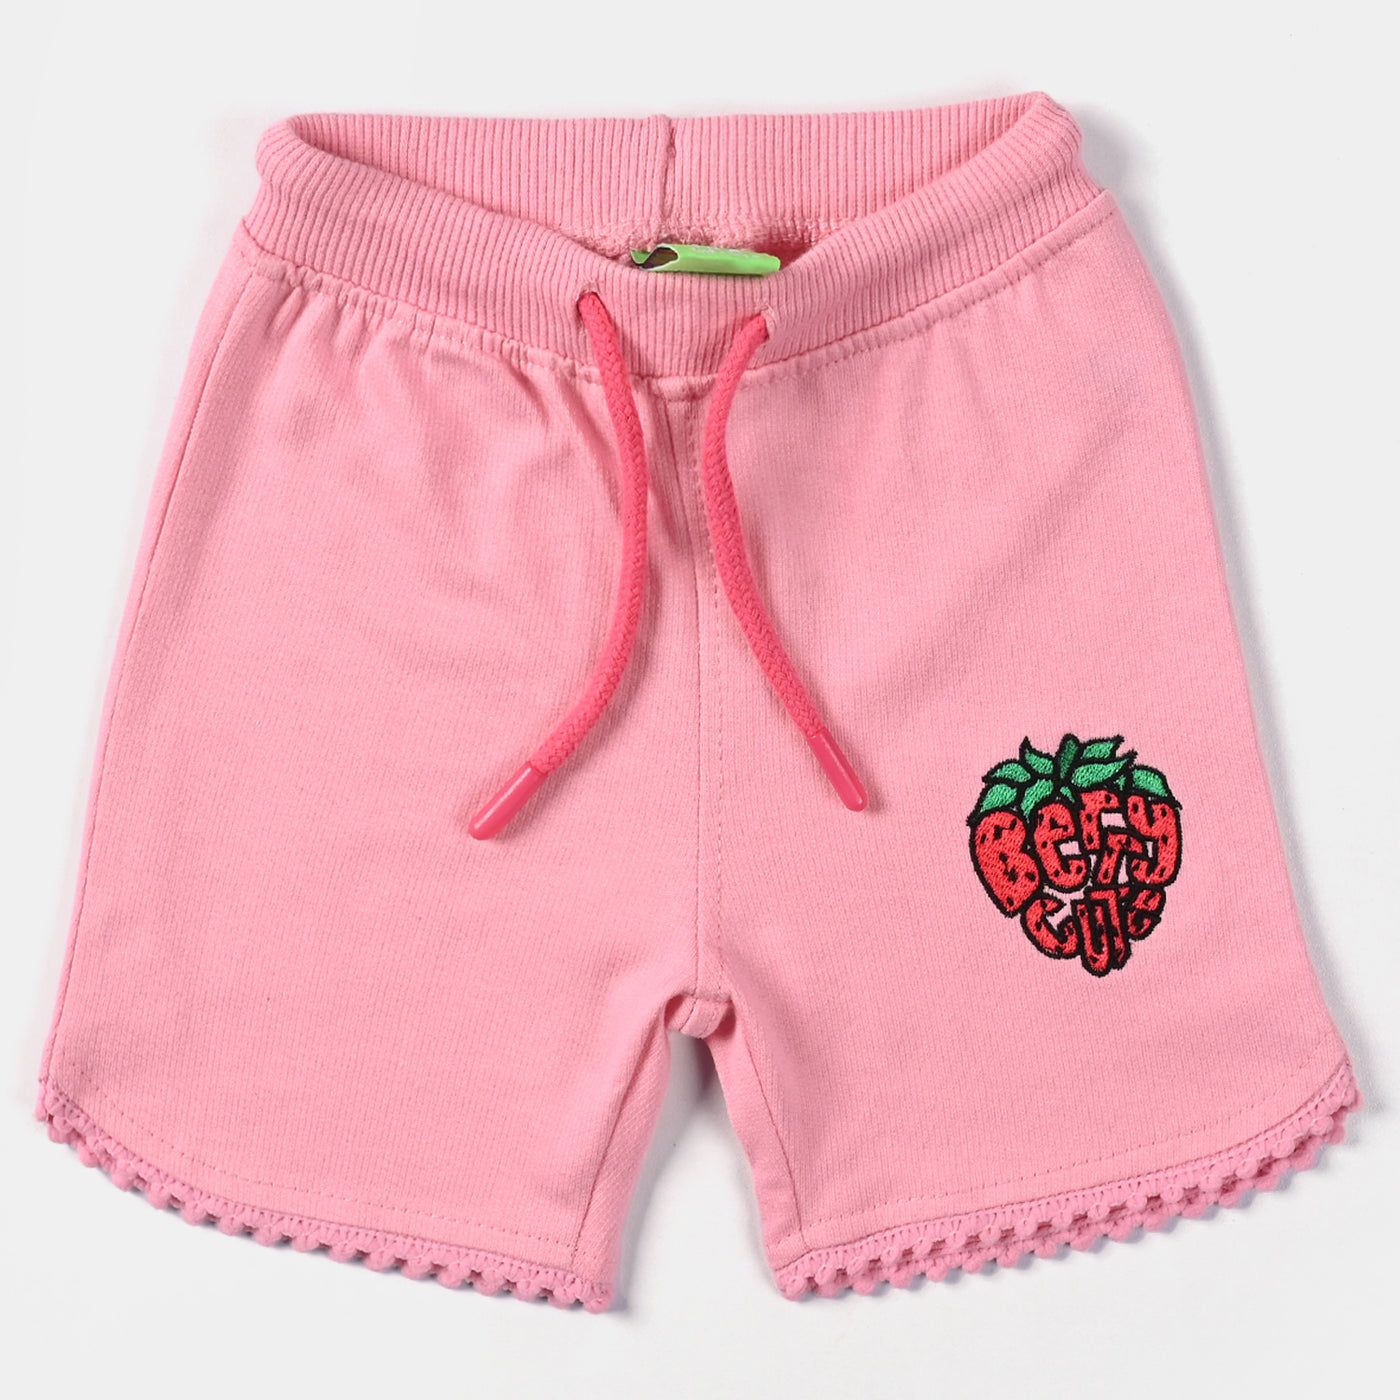 Infant Girls Cotton Terry Knitted Short Berry Cute-Candy Pink